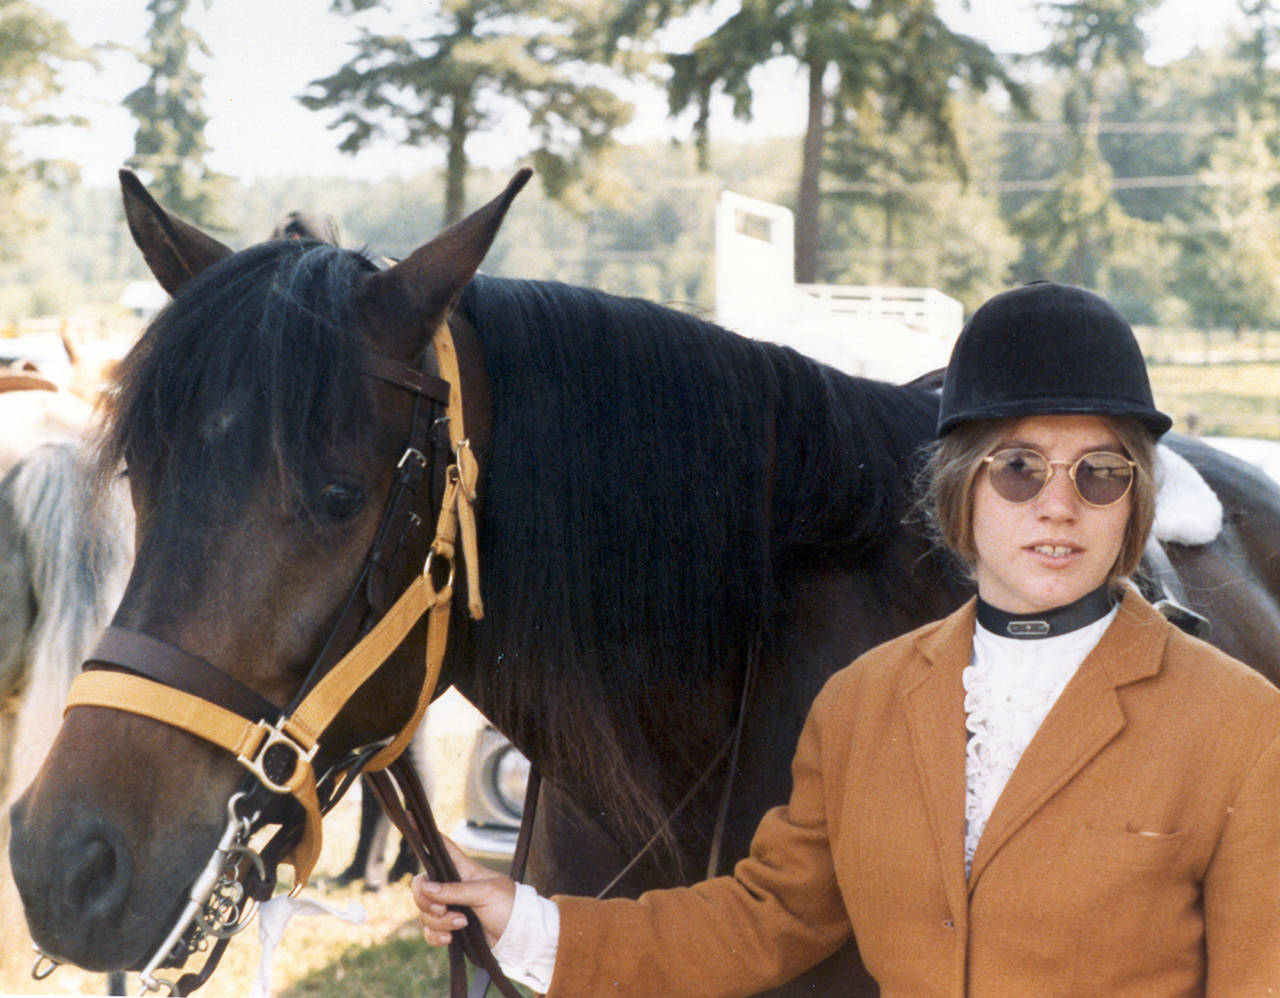 Jody Loomis with her horse in 1972. (Snohomish County Sheriff’s Office)